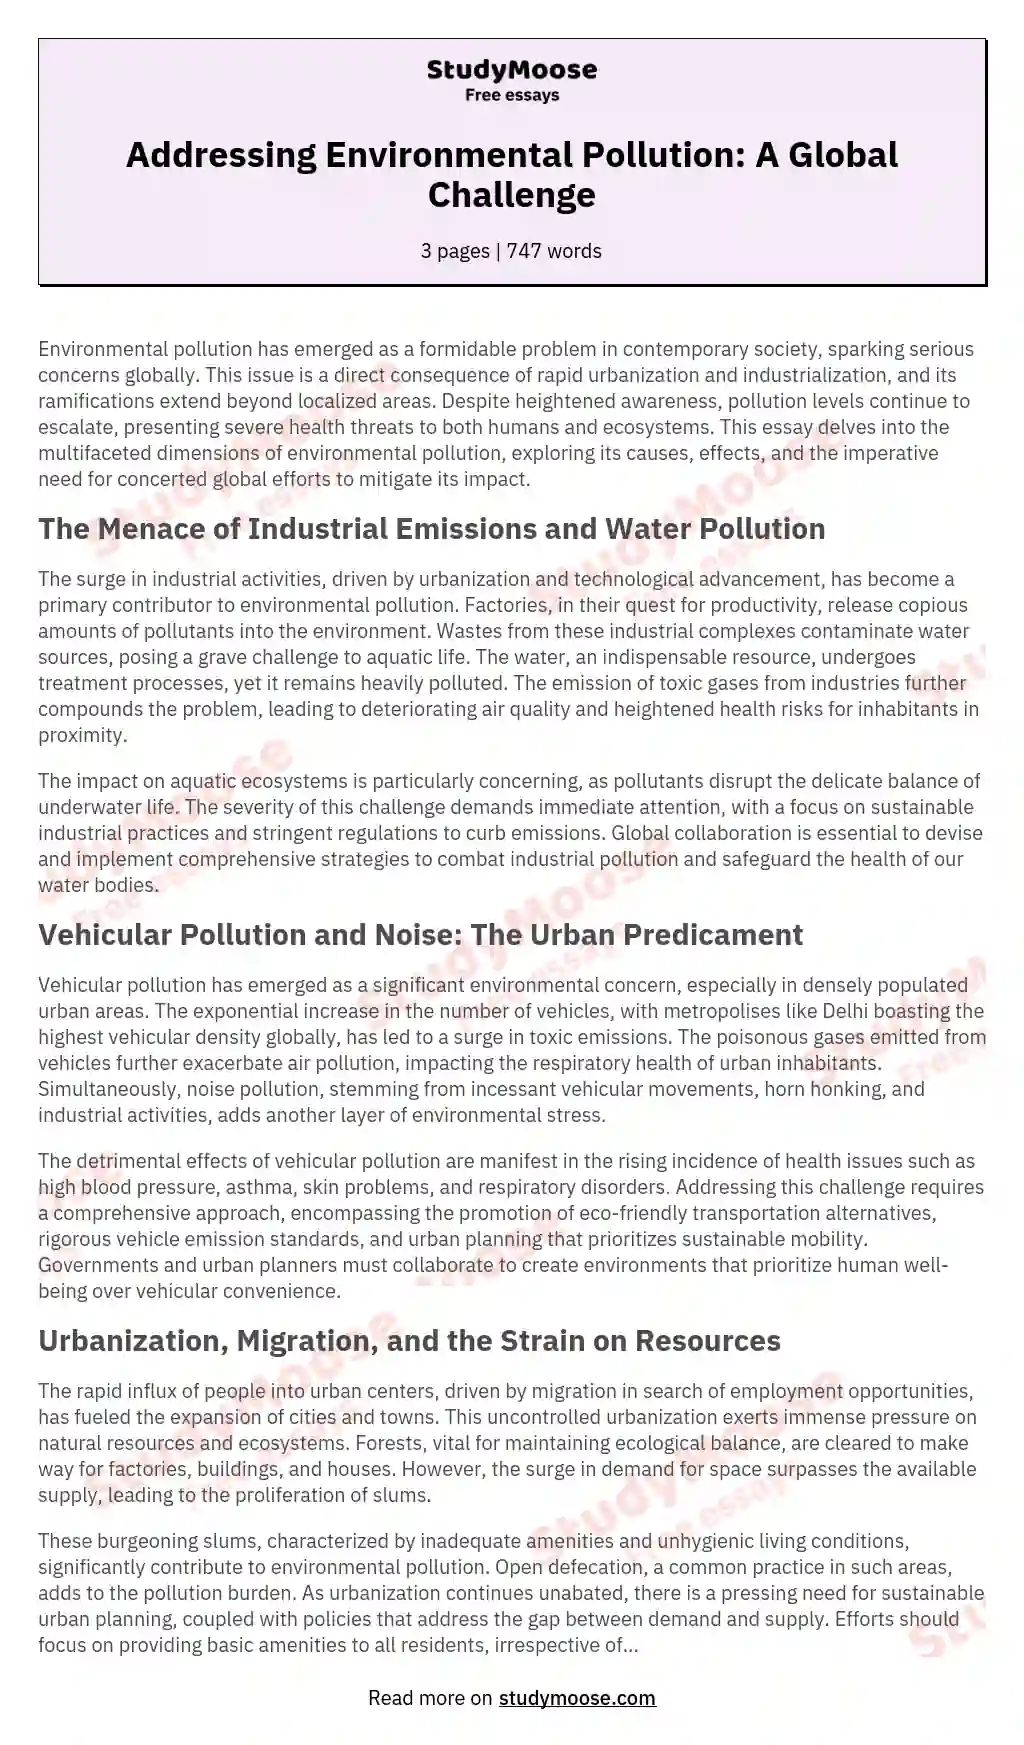 Addressing Environmental Pollution: A Global Challenge essay